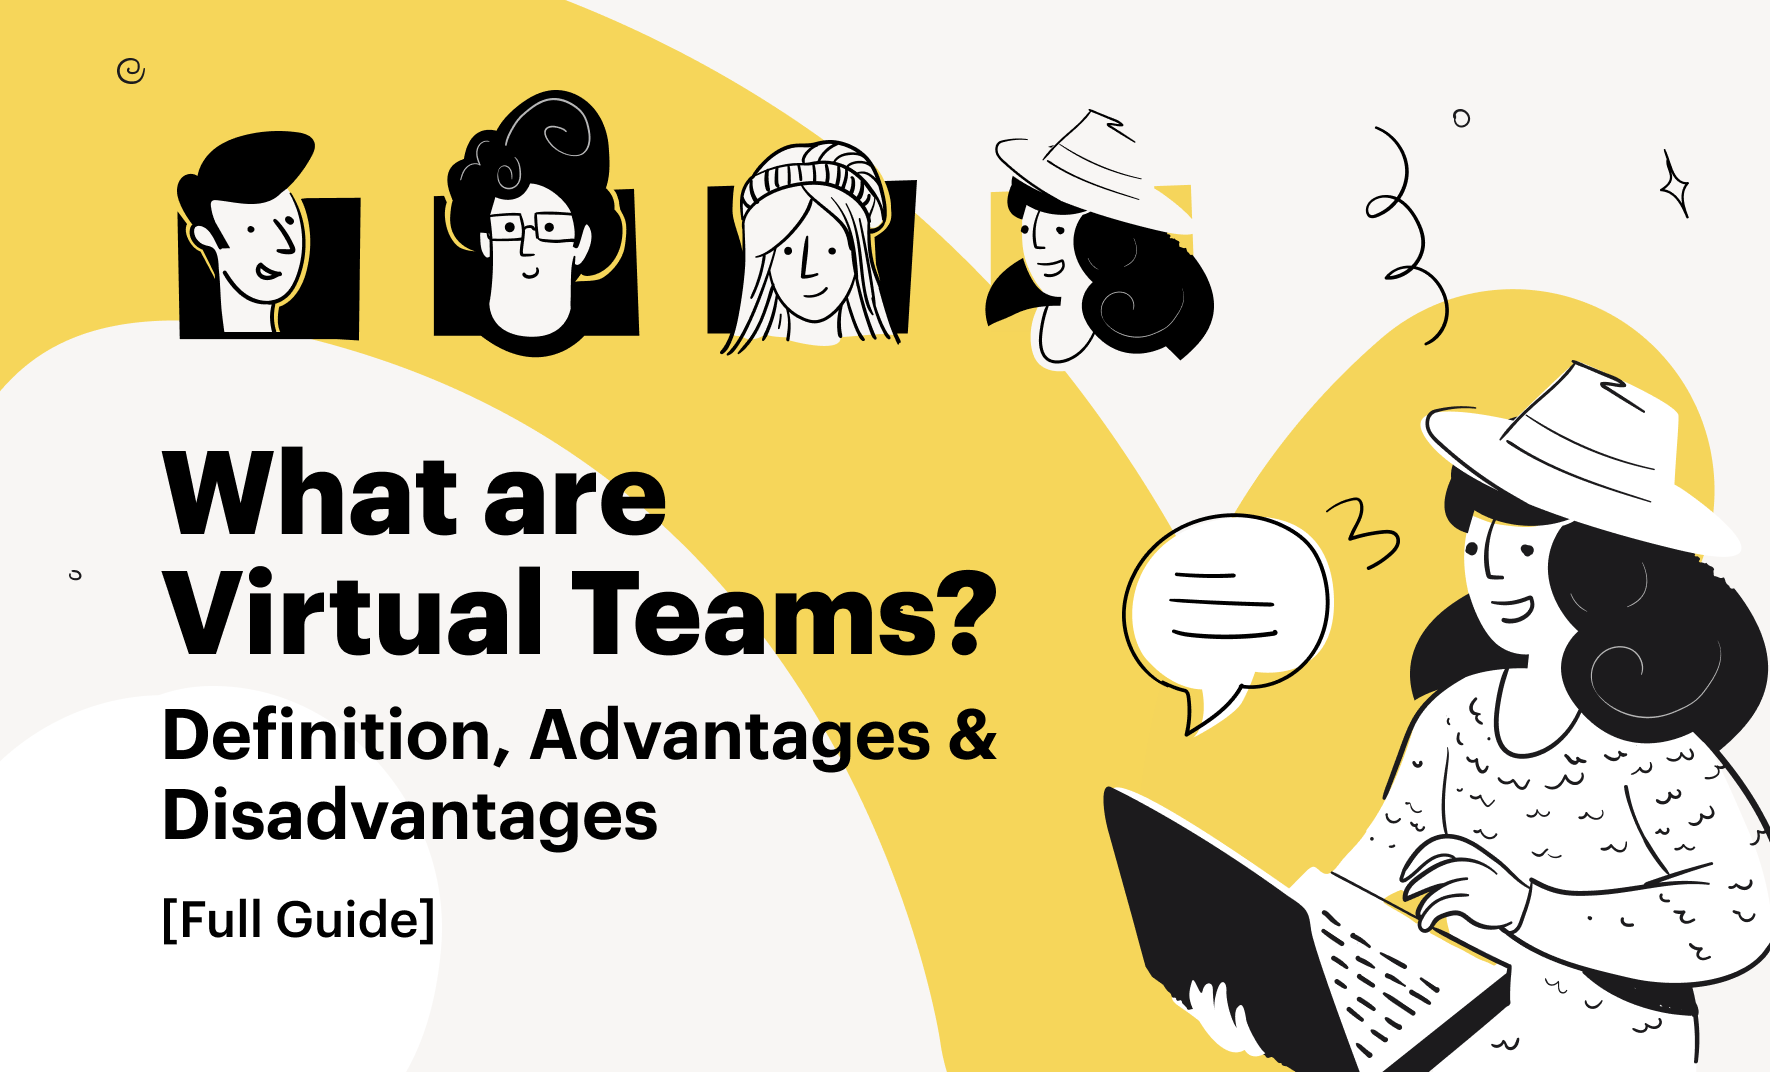 What are Virtual Teams?